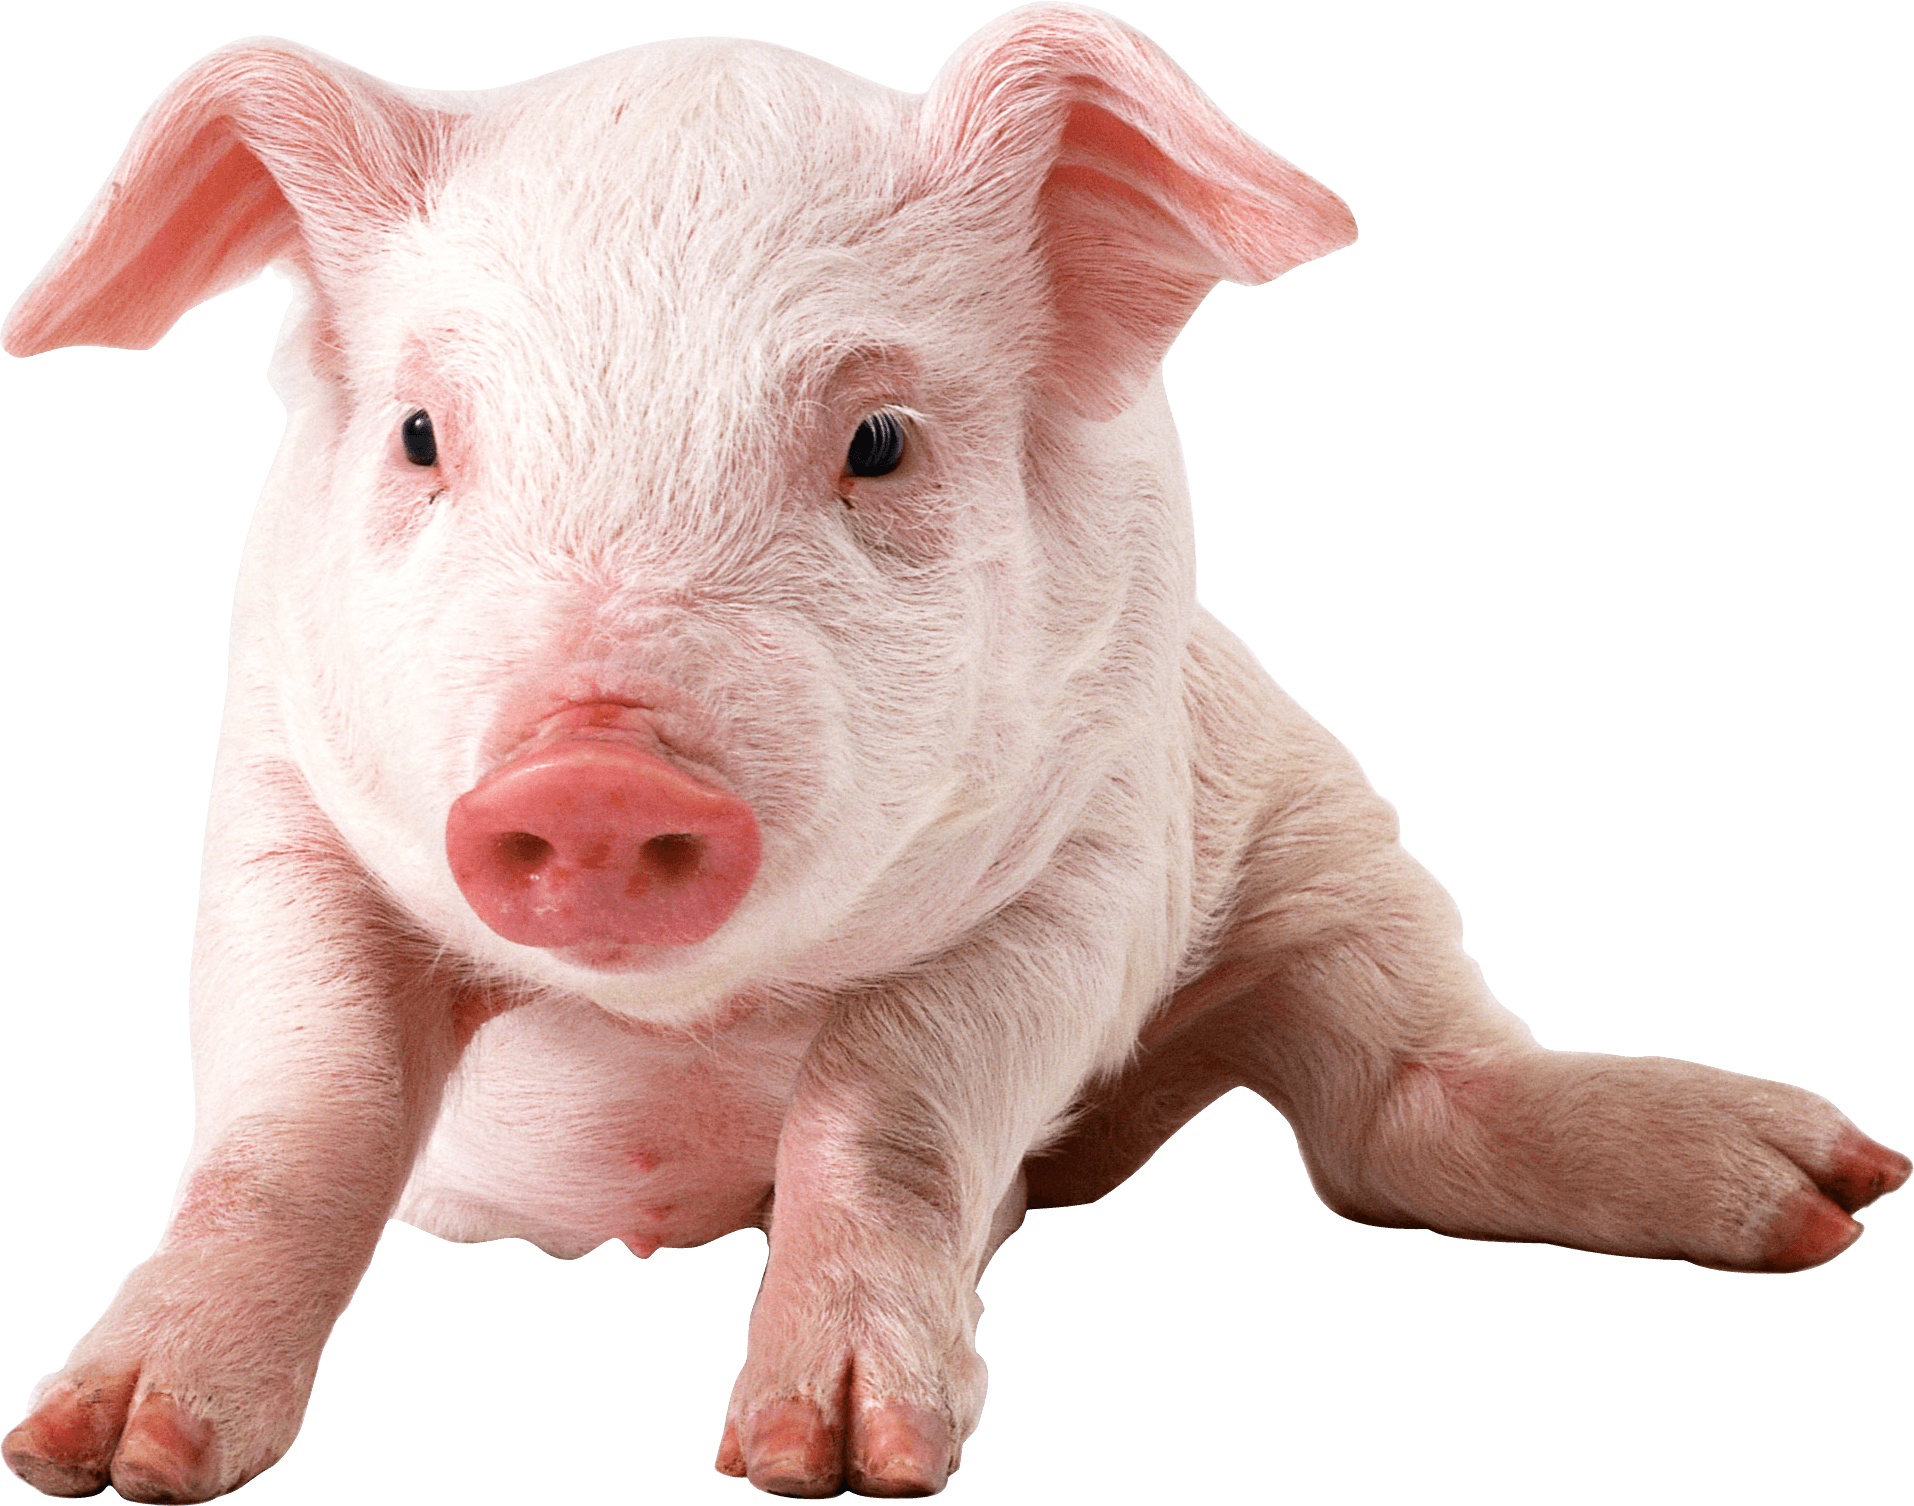 HDWP 49: Pigs Wallpaper, Pigs Collection Of Widescreen Wallpaper